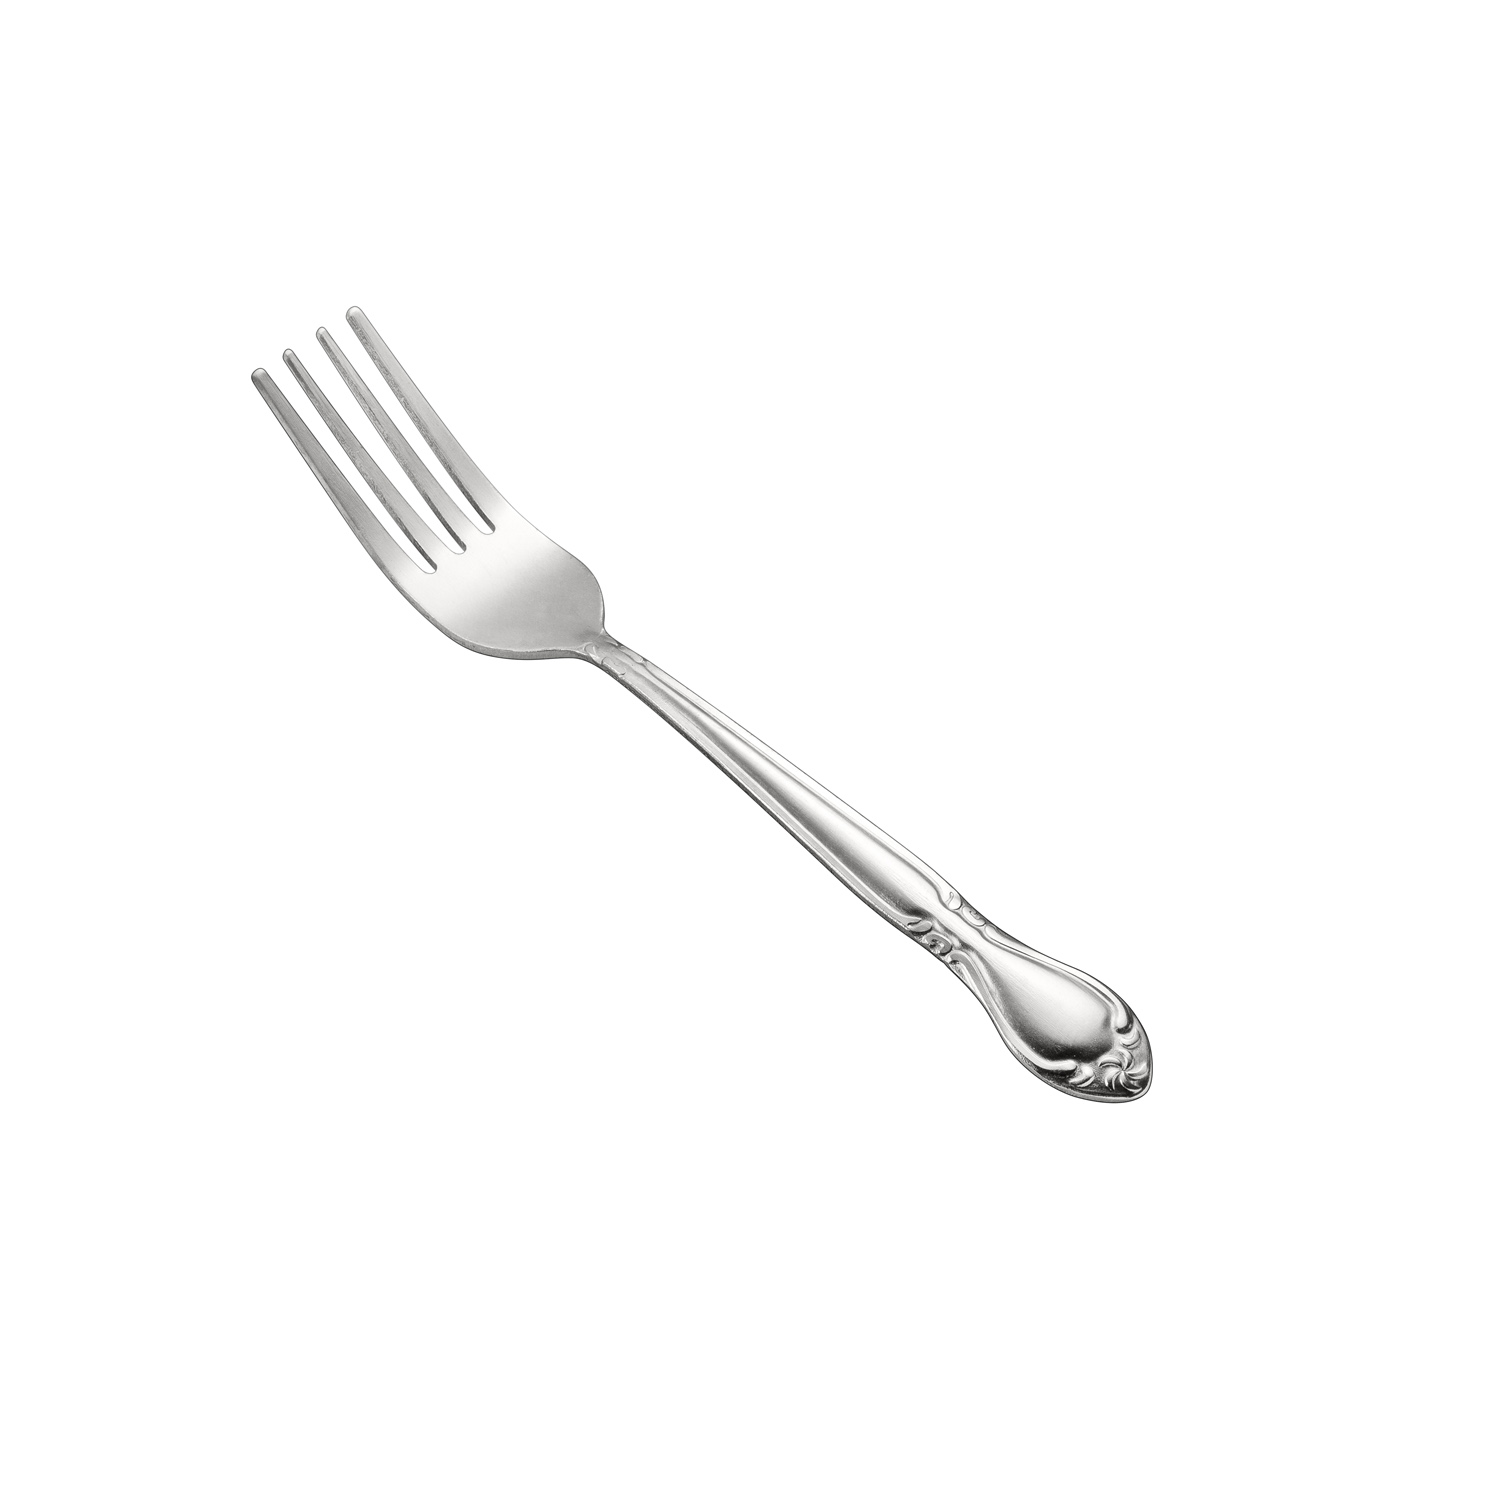 CAC China 2003-05 Elizabeth Dinner Fork Frost, Heavyweight 18/0, 7 1/4"